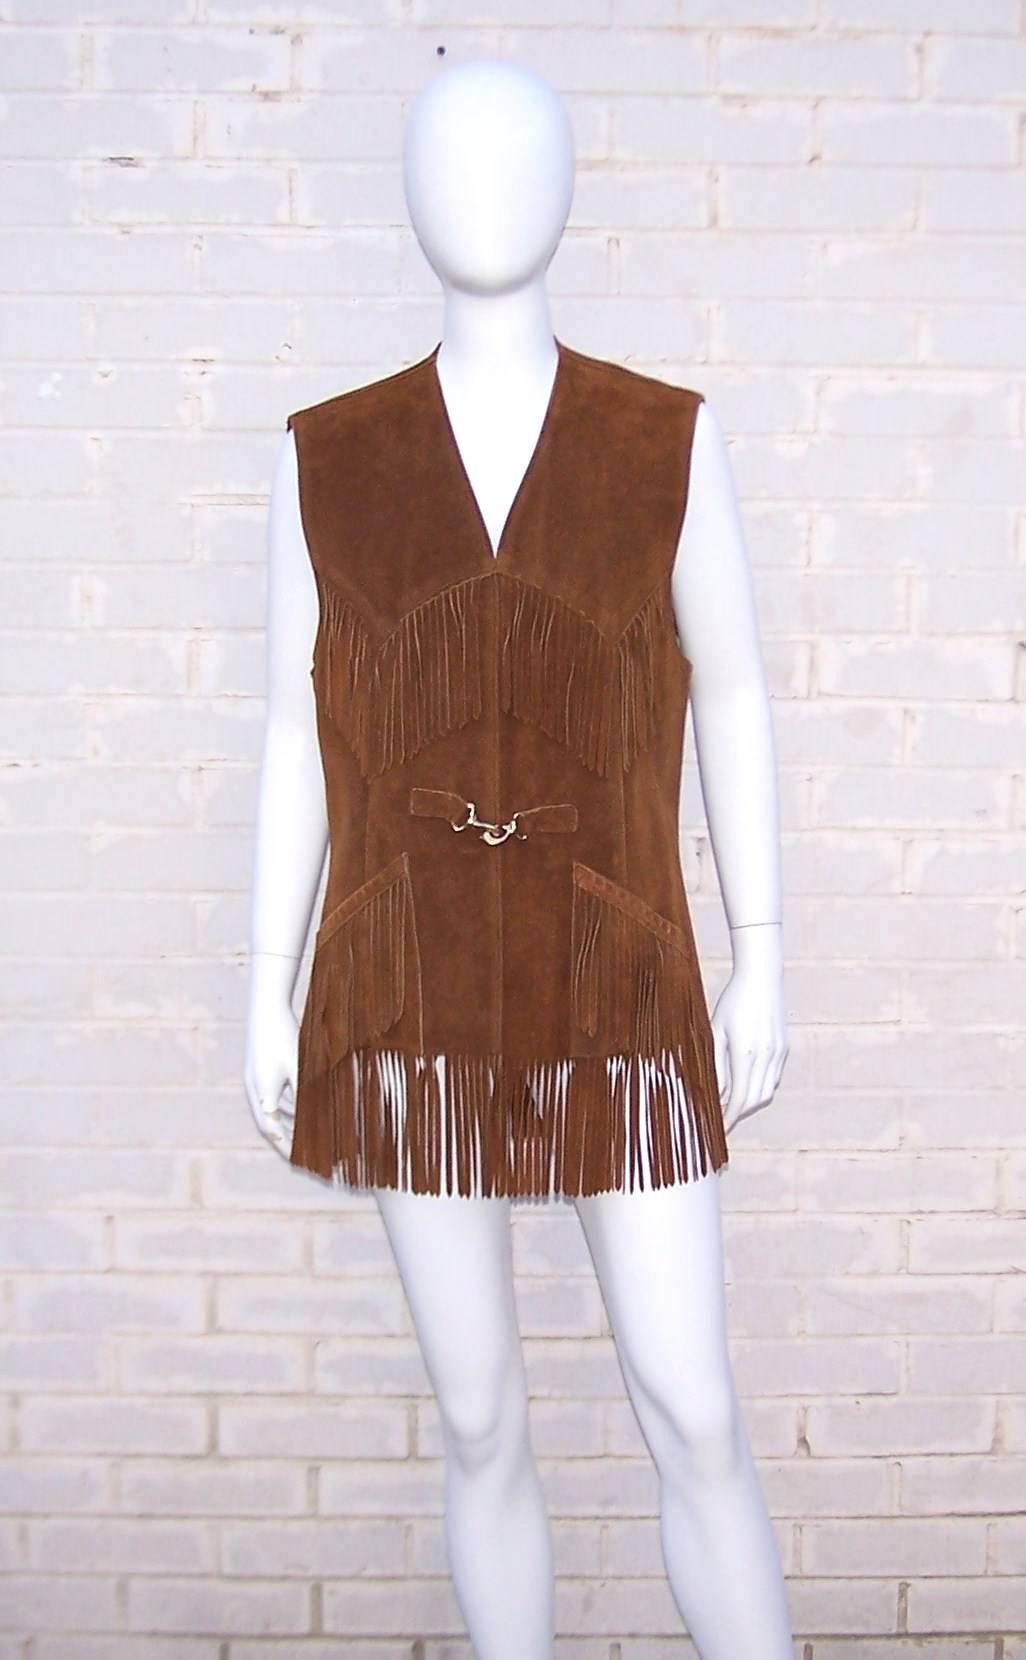 She's a little bit country OR she's a little bit rock 'n' roll ... this vintage 1970's Saks Fifth Avenue caramel suede vest can be boho or full on cowgirl depending on your accessories and personal style.  The attention to details including the